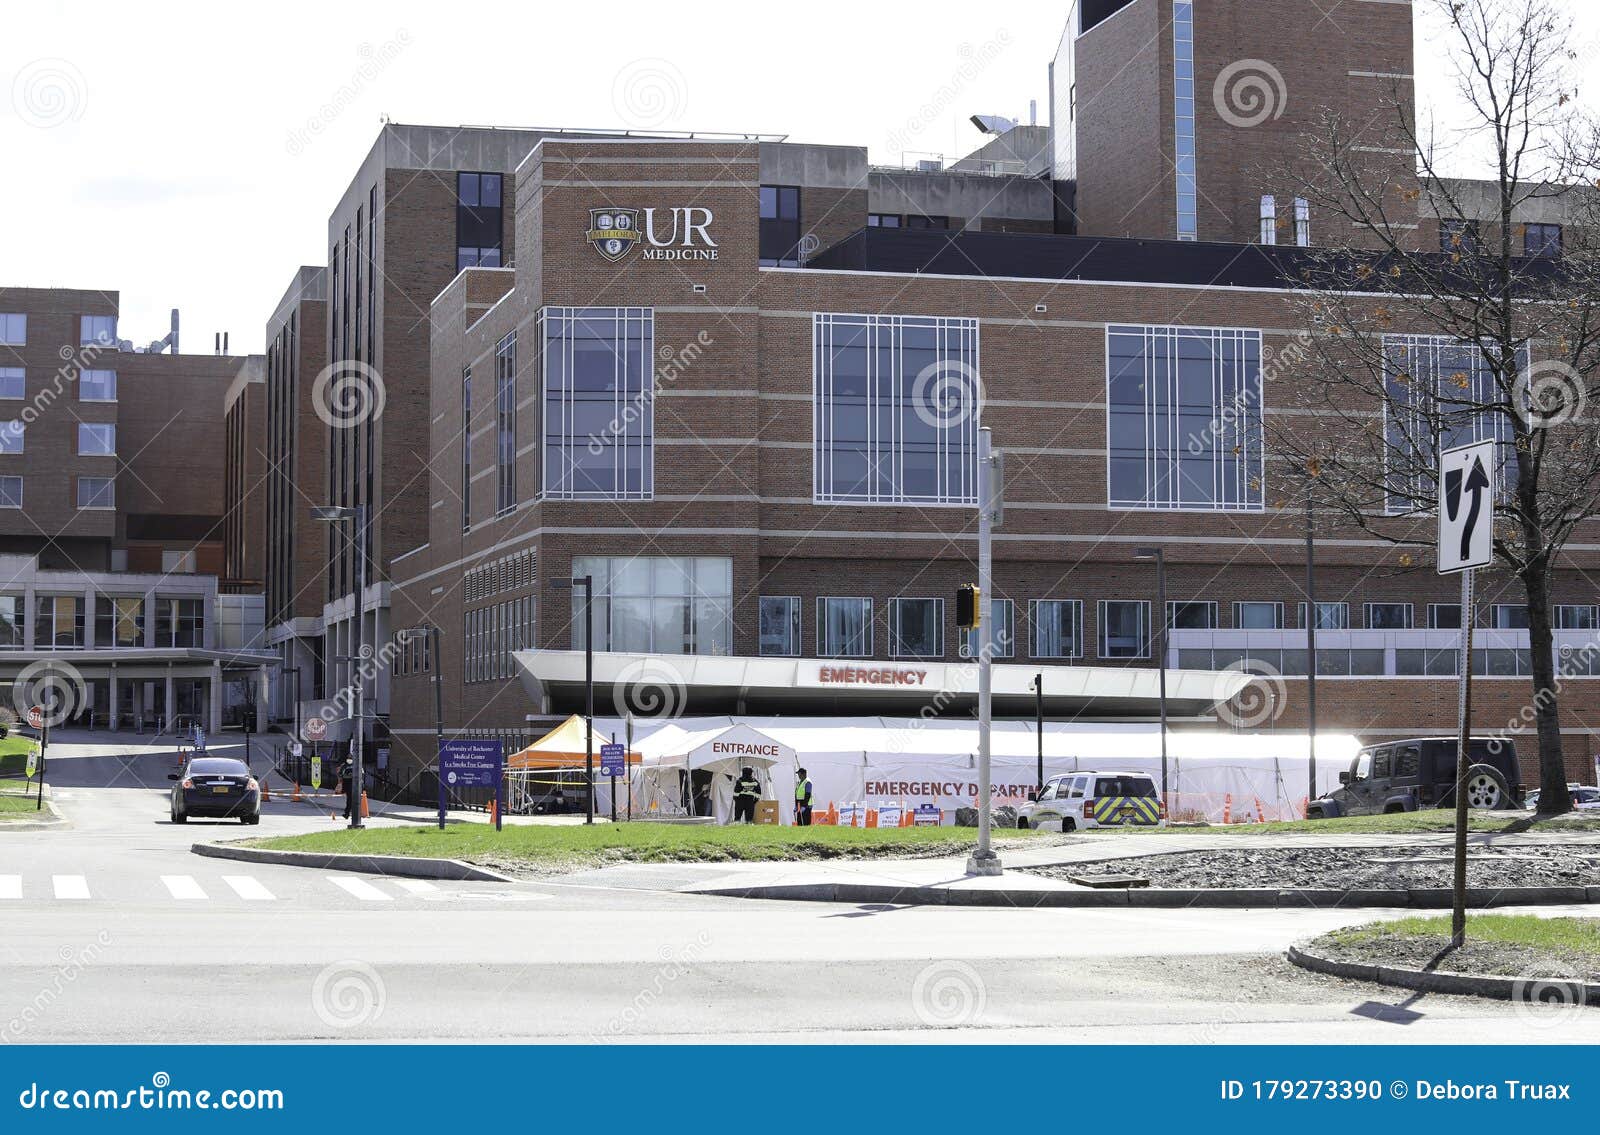 Rochester, New York / USA April 1, 2020 View Of The Emergency Room Entrance At The University Of